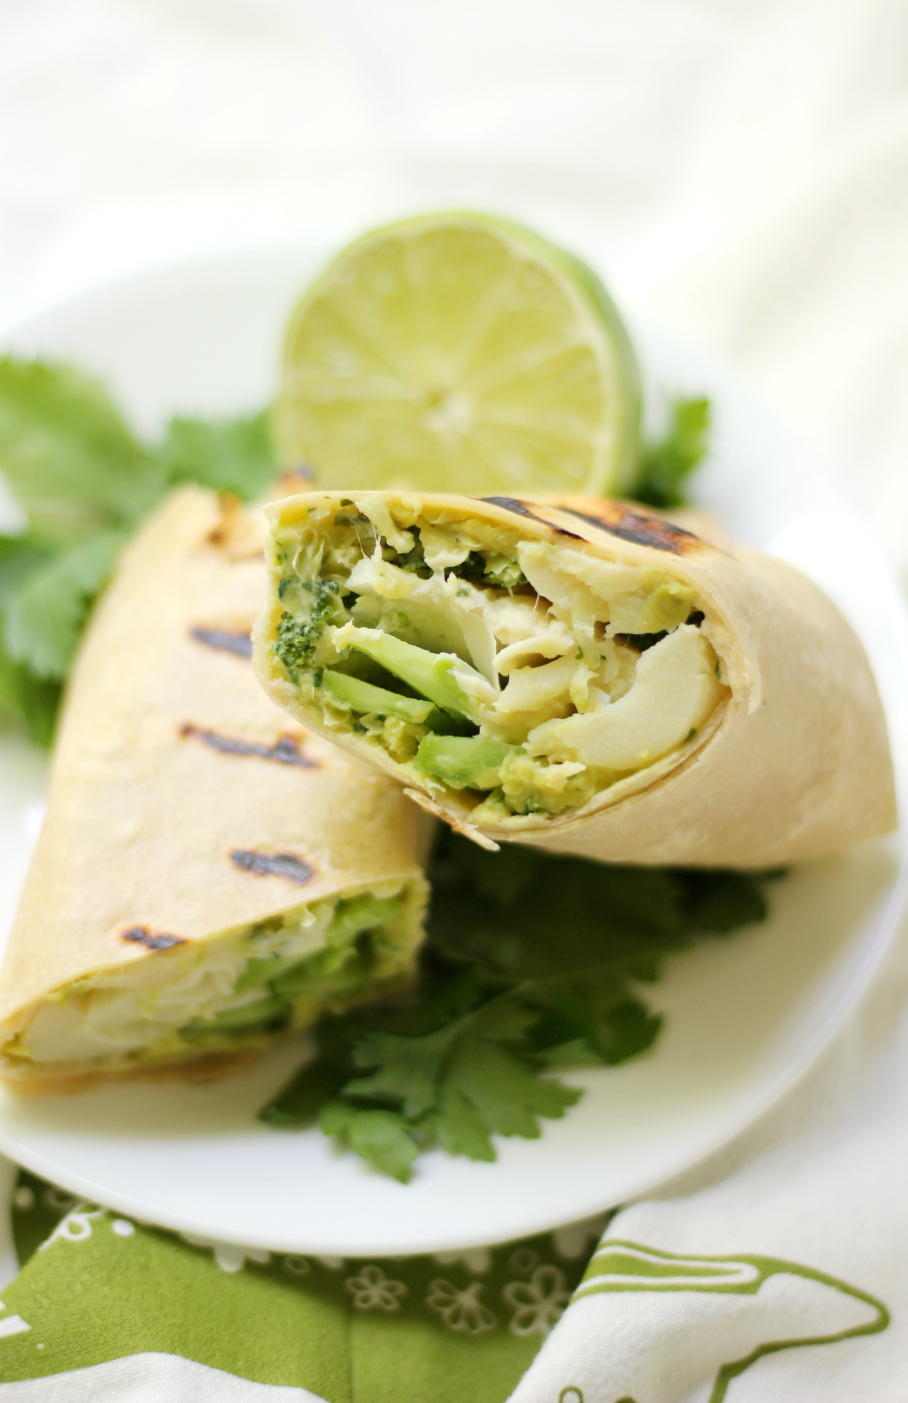 Grilled Green Goddess Wraps | Strength and Sunshine @RebeccaGF666 No more boring lunches! These Grilled Green Goddess Wraps are full of green goodness and nutrition with a lima bean spread, broccoli, and hearts of palm! Gluten-free, nut-free, and vegan, these wraps are a healthy recipe that's school or work friendly and freezable!